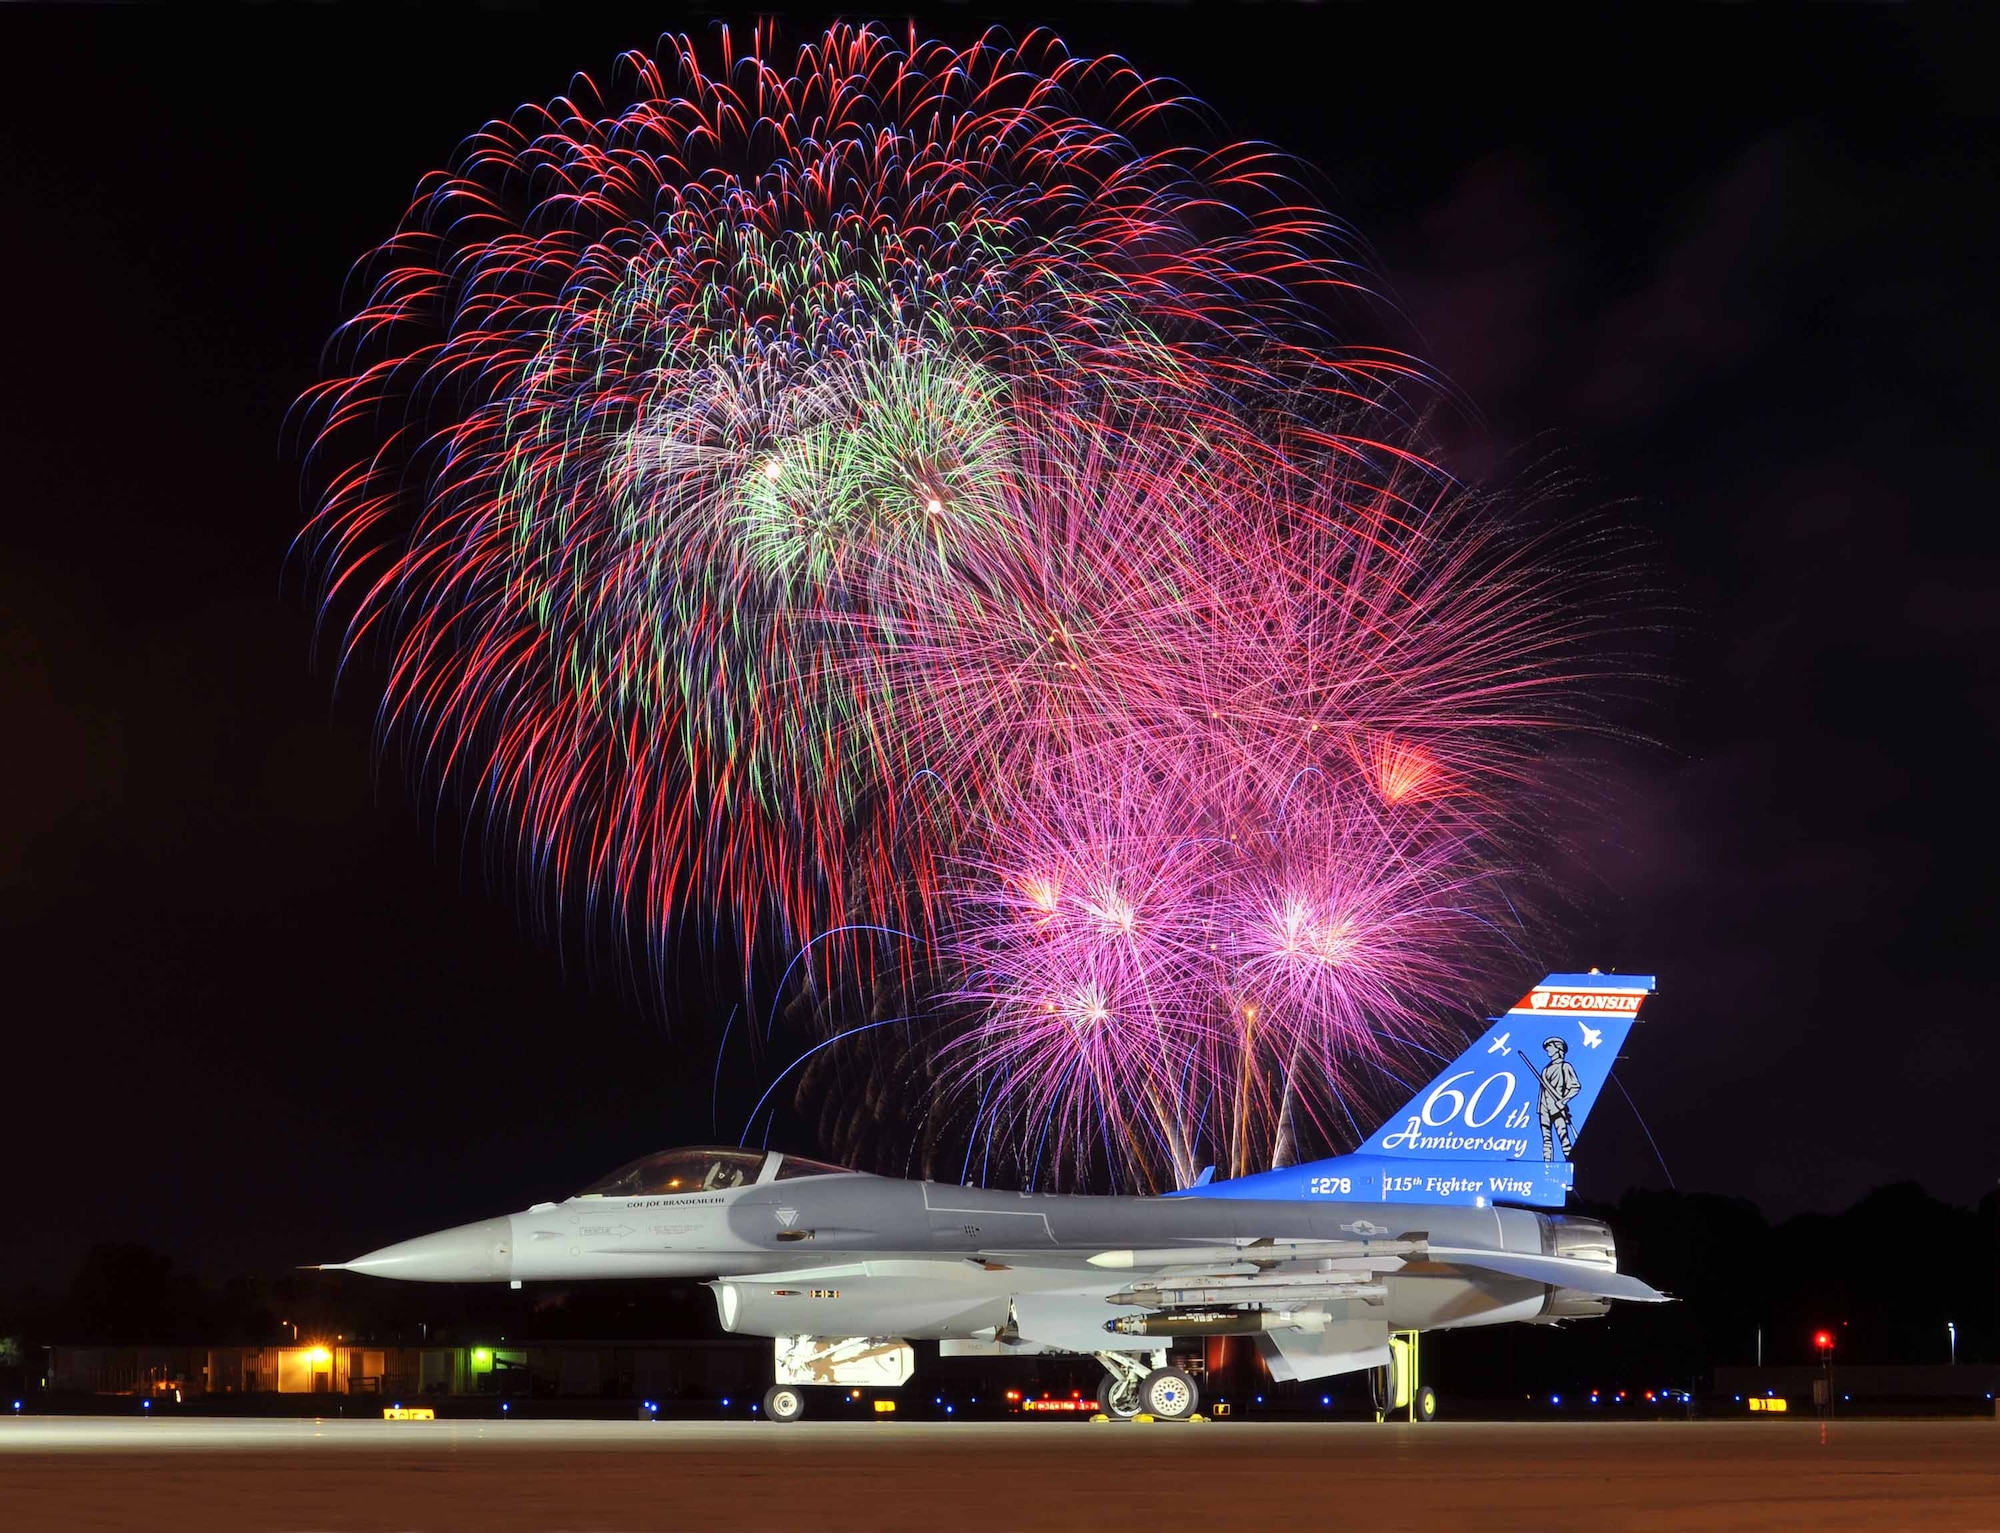 An F-16 Fighting Falcon aircraft from the 115th Fighter Wing, Wisconsin Air National Guard sits on the runway in Madison, Wis., June 28, 2008, during an Independence Day celebration and fireworks display. (DoD photo by Joe Oliva, U.S. Air Force)(Released)